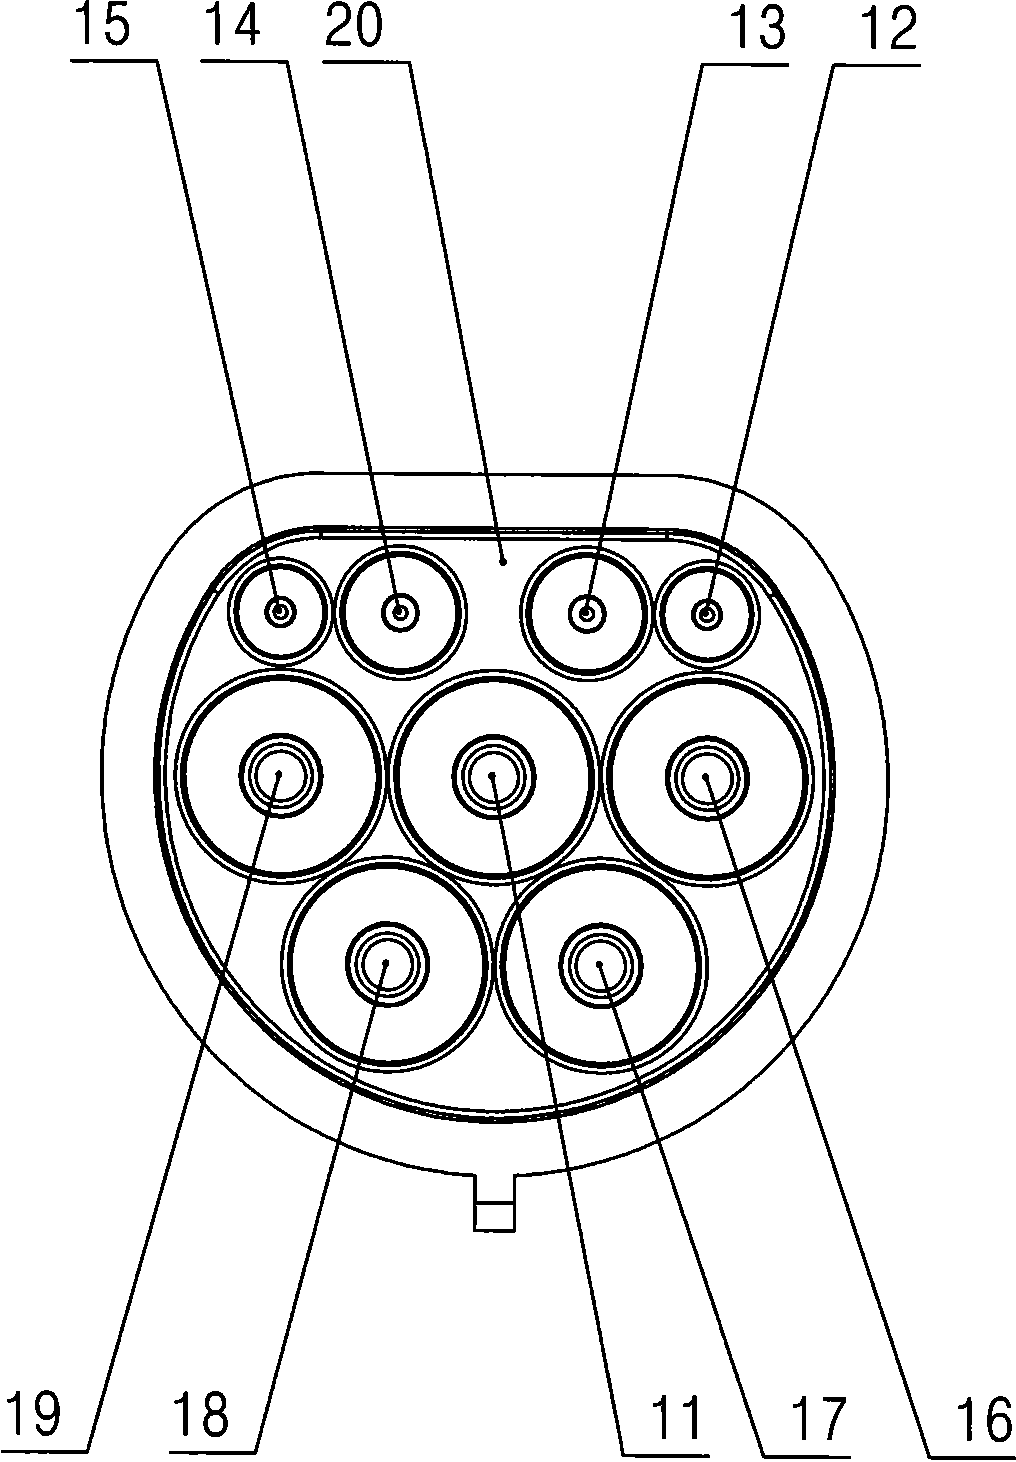 Arrangement structures of jacks in socket and contact pins in plug of alternating current charging interface